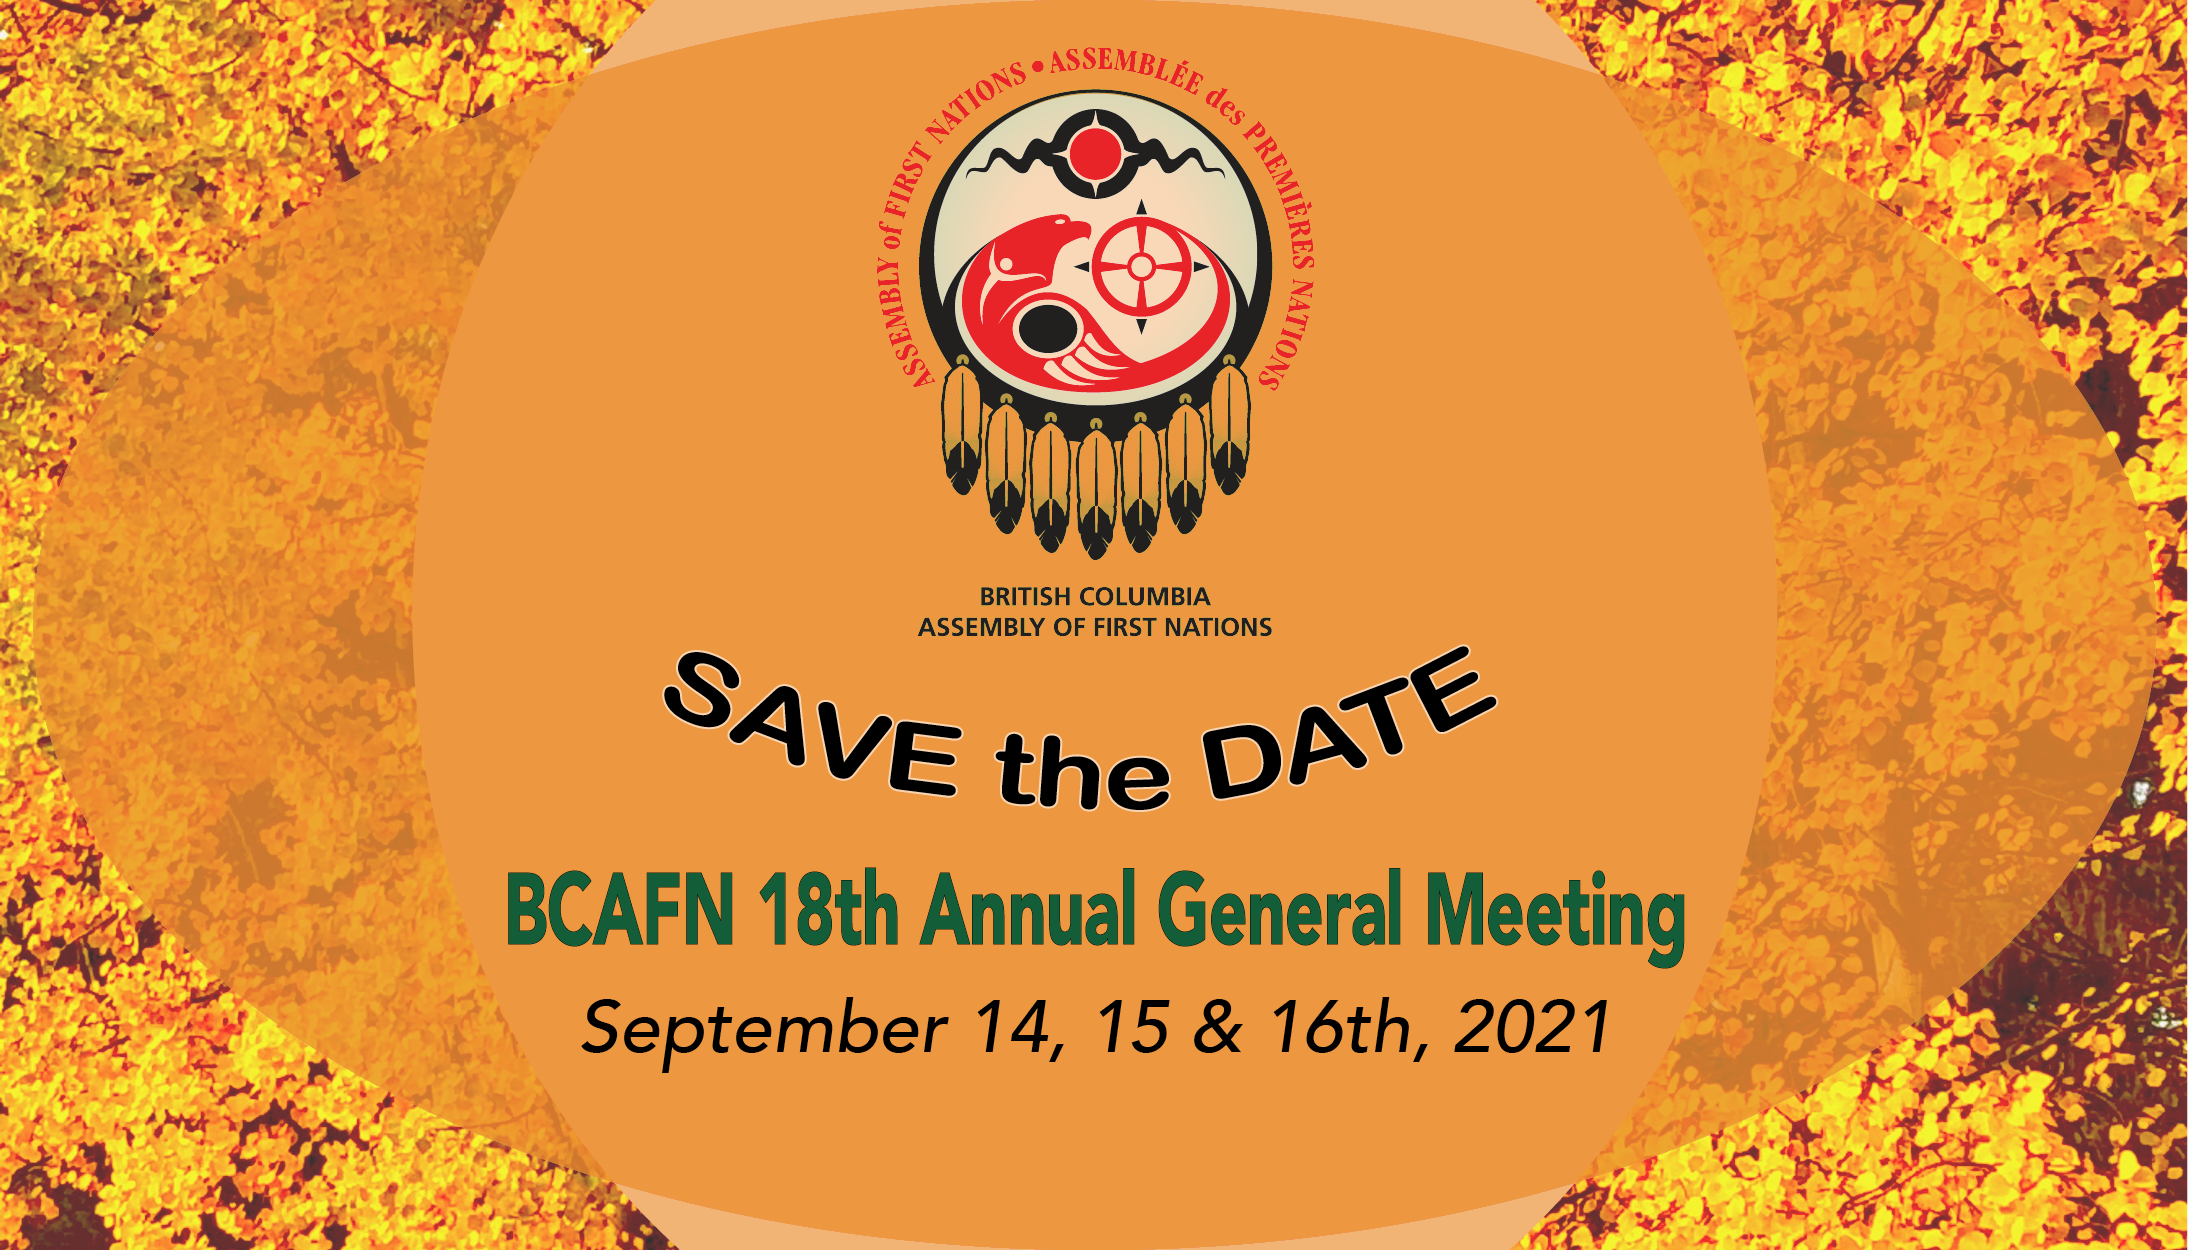 AGM 2021 save the date